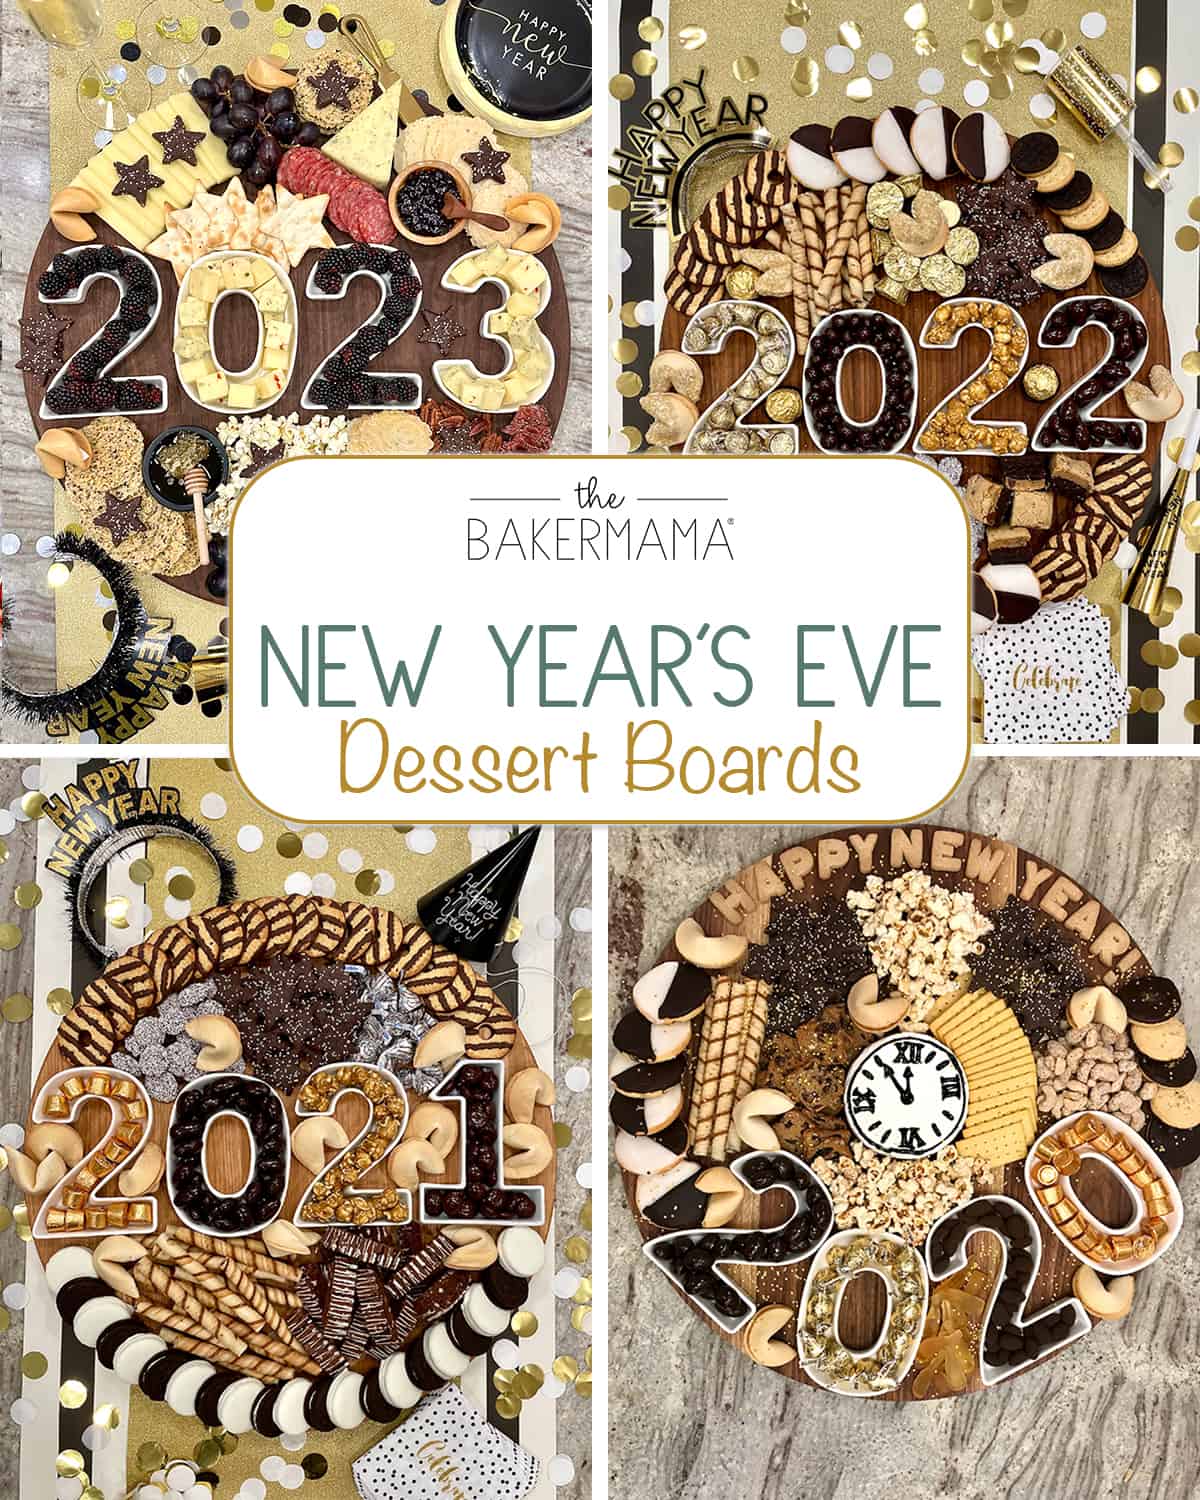 New Years Eve Dessert Boards by The BakerMama